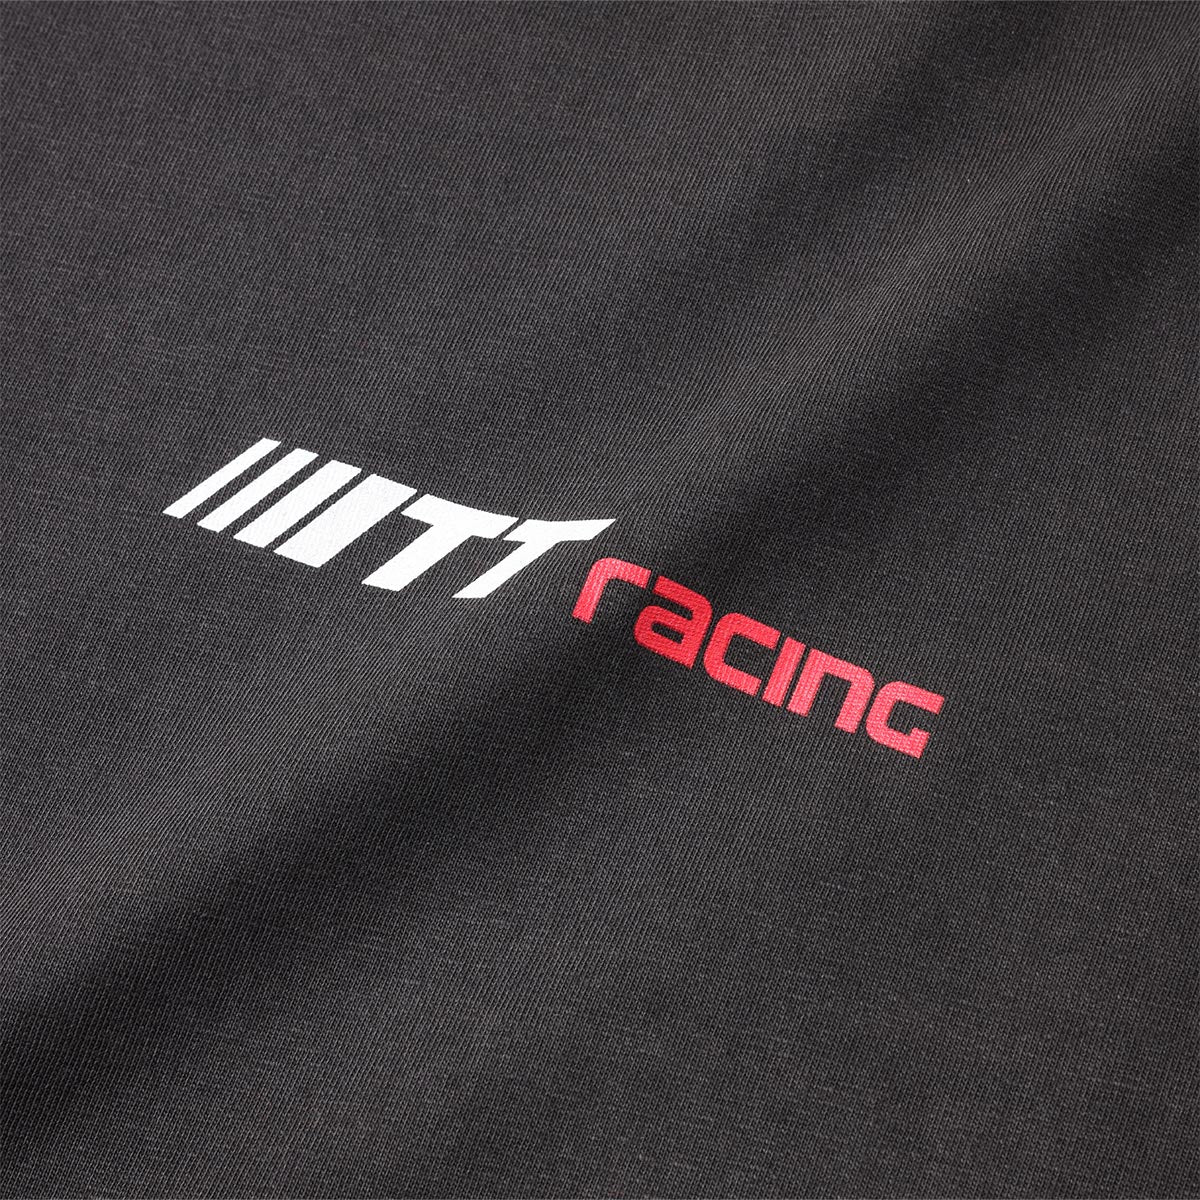 Close up of Turbo Threads Logo on Calsonic R32 GT-R car tee